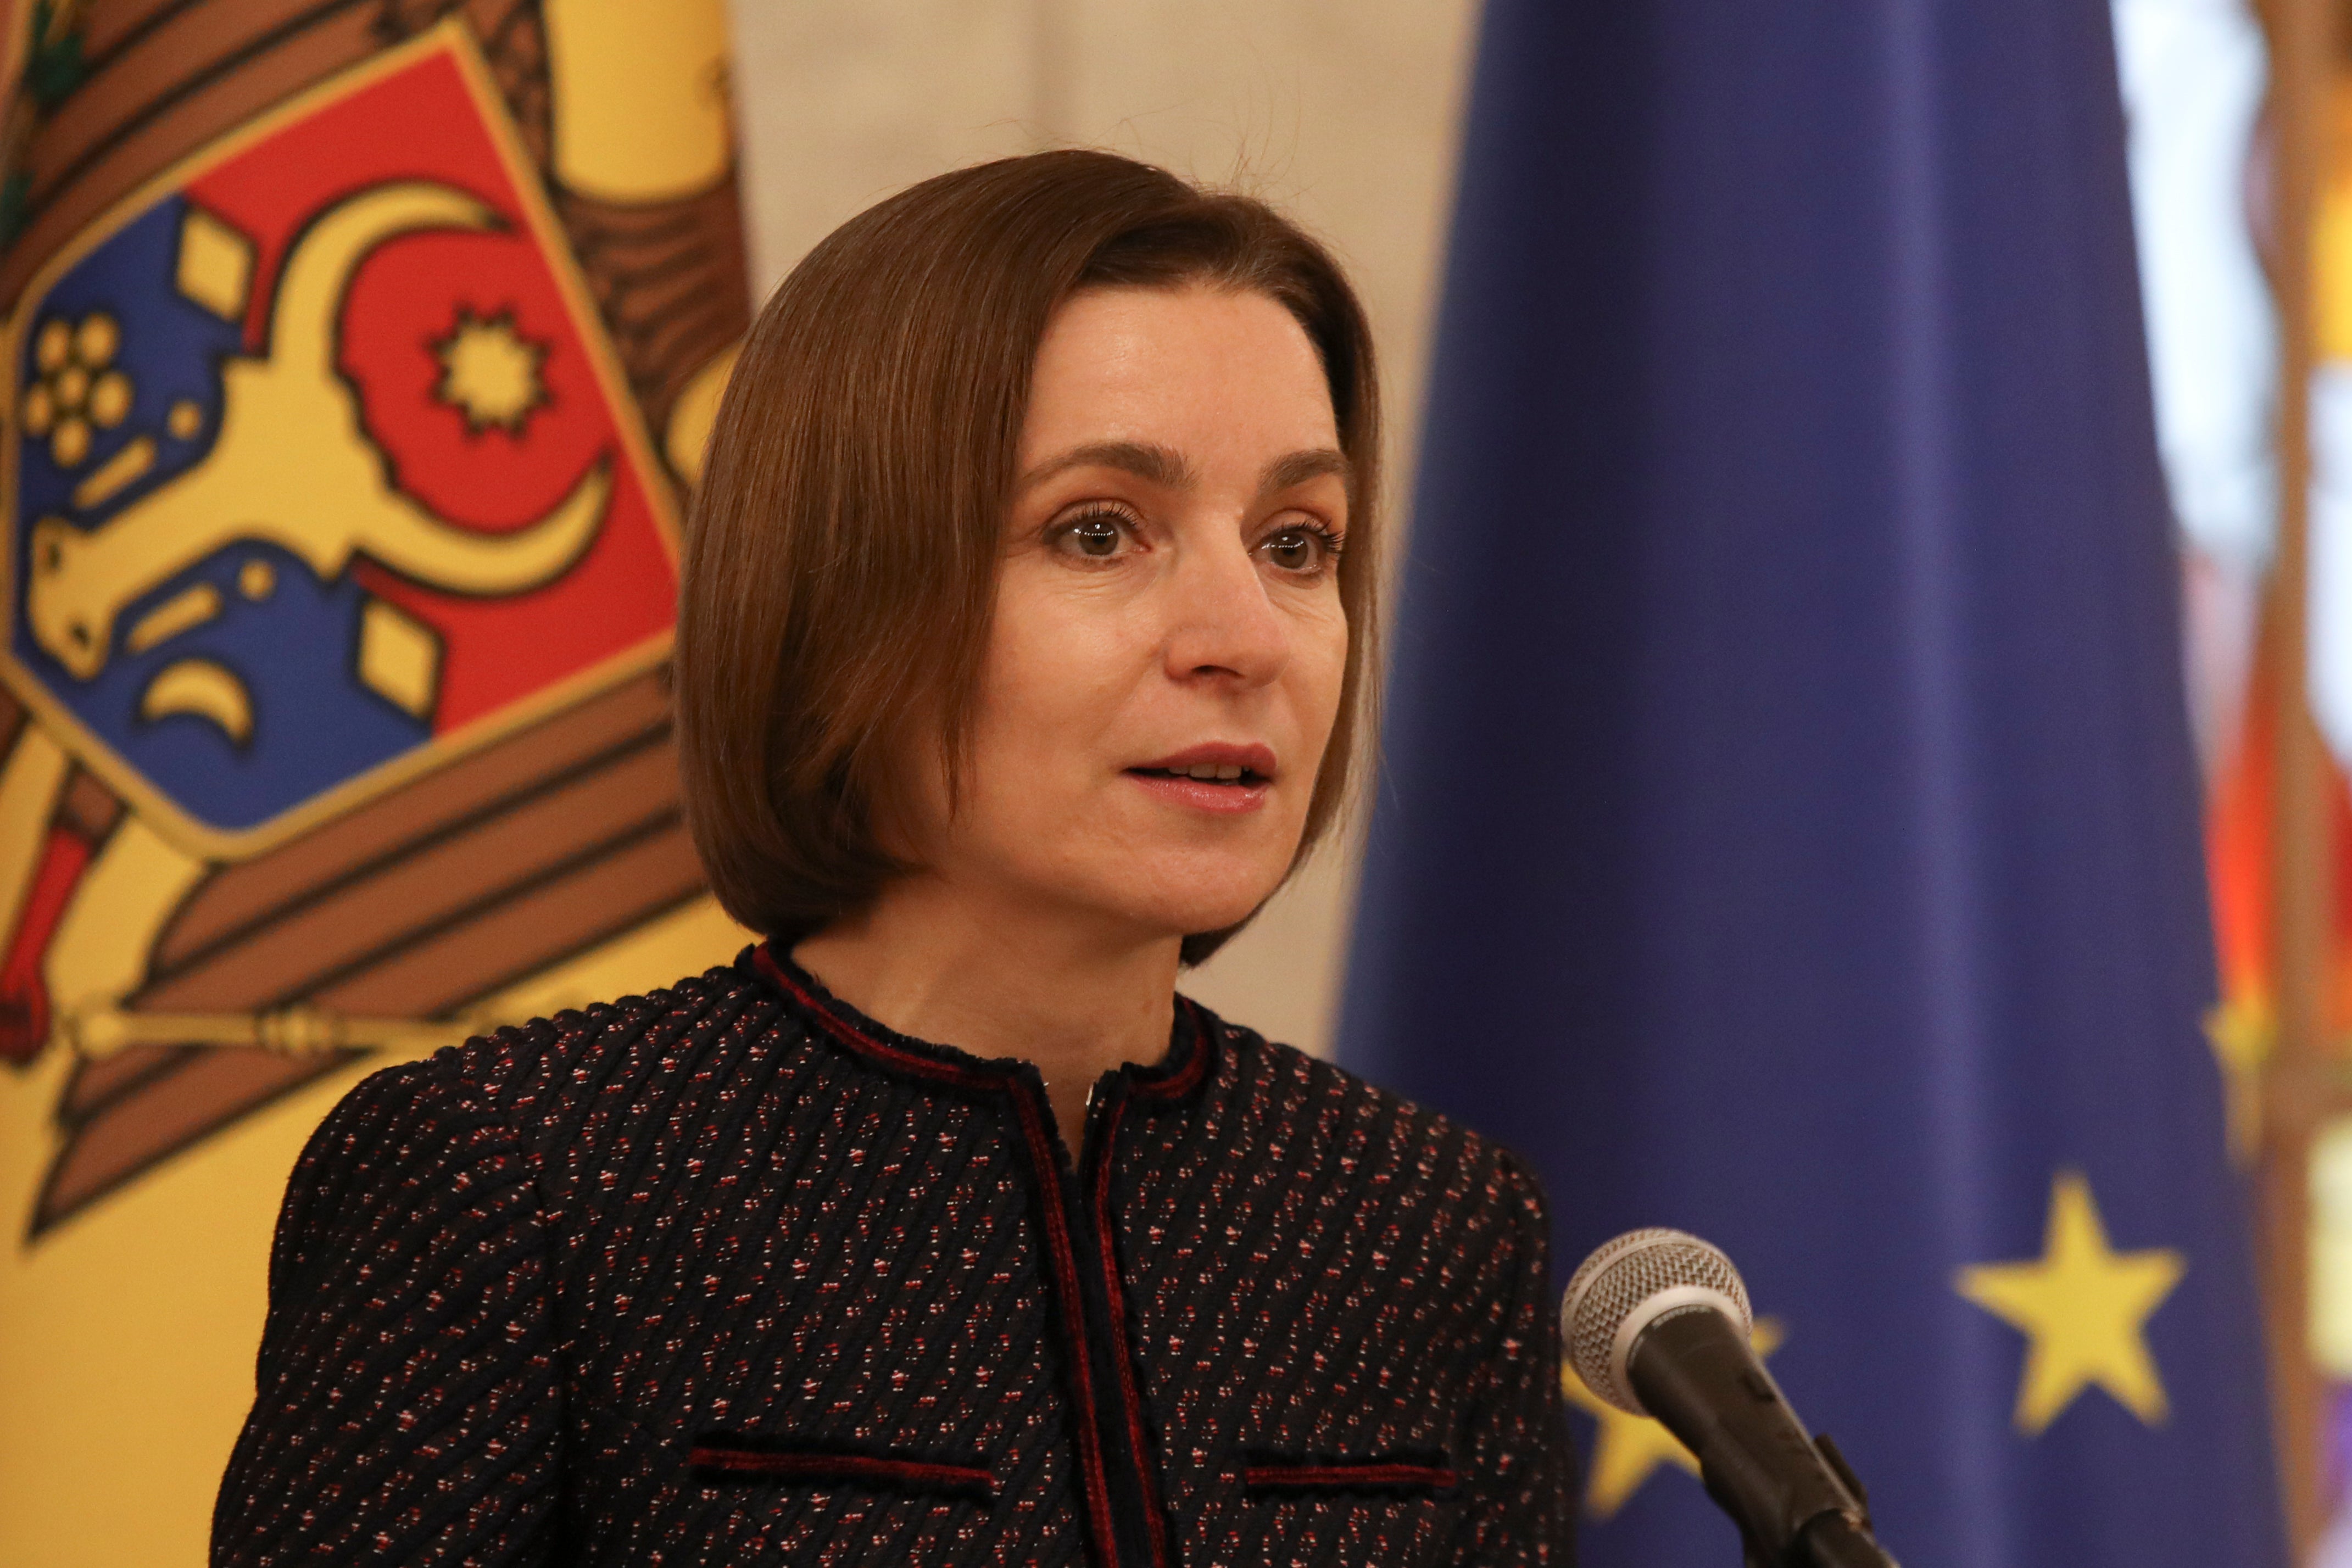 Moldova’s President Maia Sandu has outlined what she claims is a possible coup attampt by Moscow